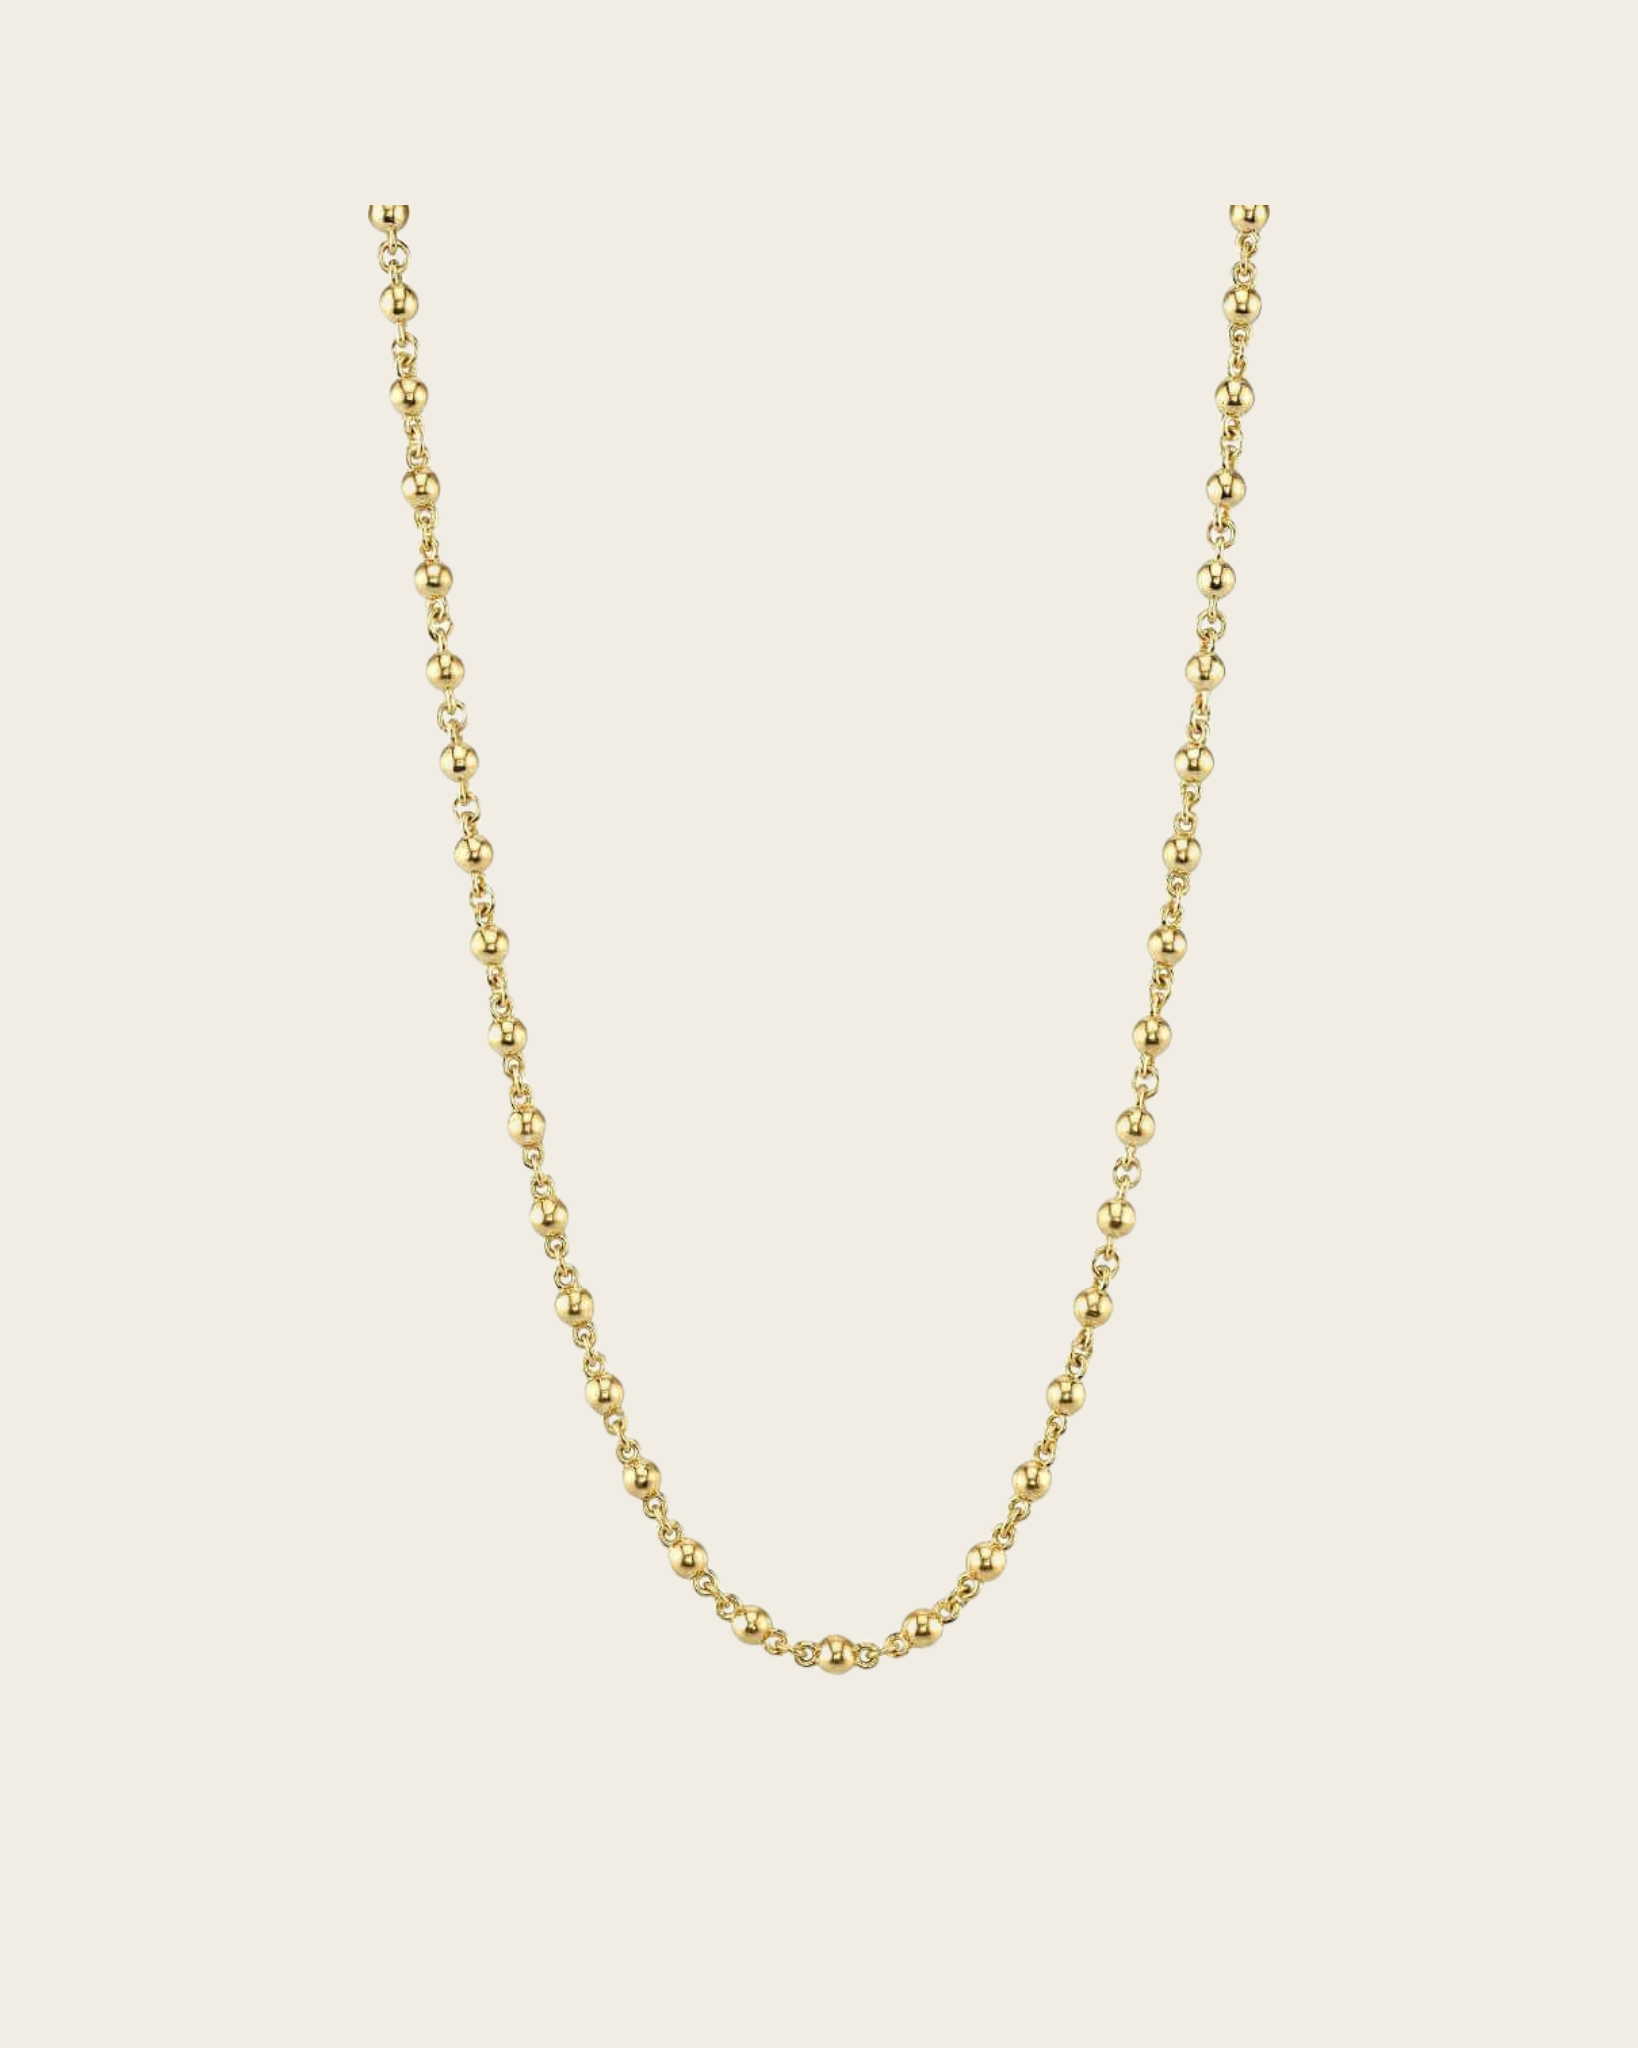 A gold round ball rosary chain by Single Stone.